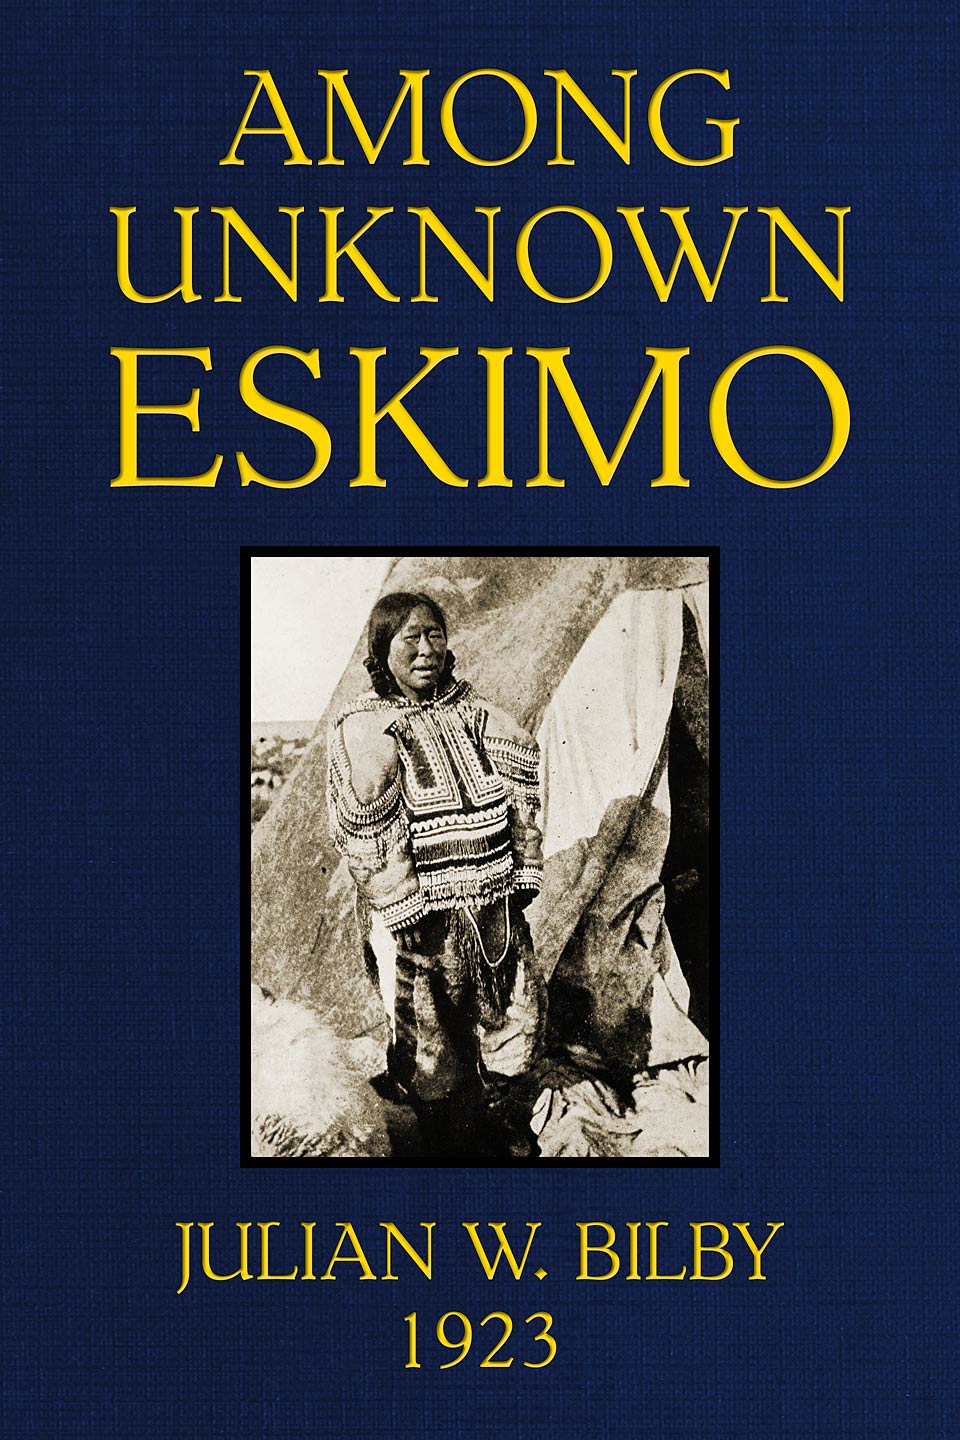 Among unknown Eskimo image picture